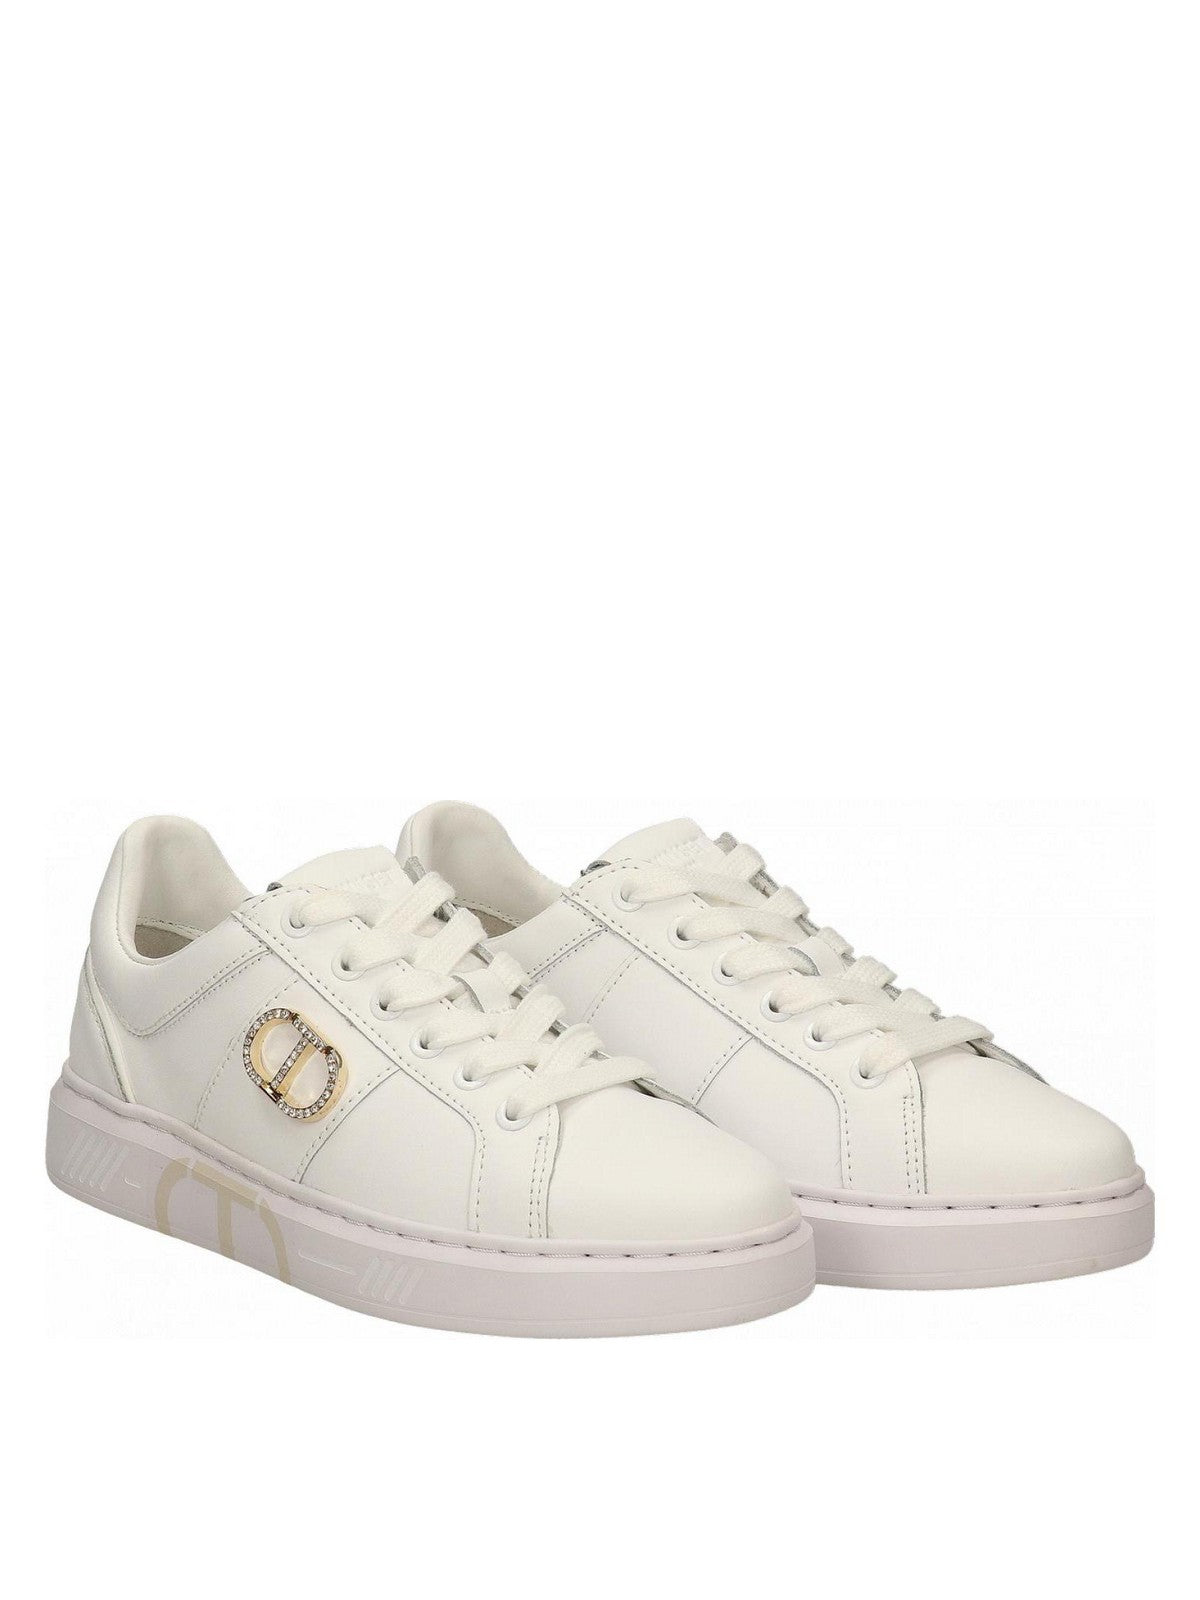 TWINSET Sneaker Donna  232TCP210 00001 Bianco